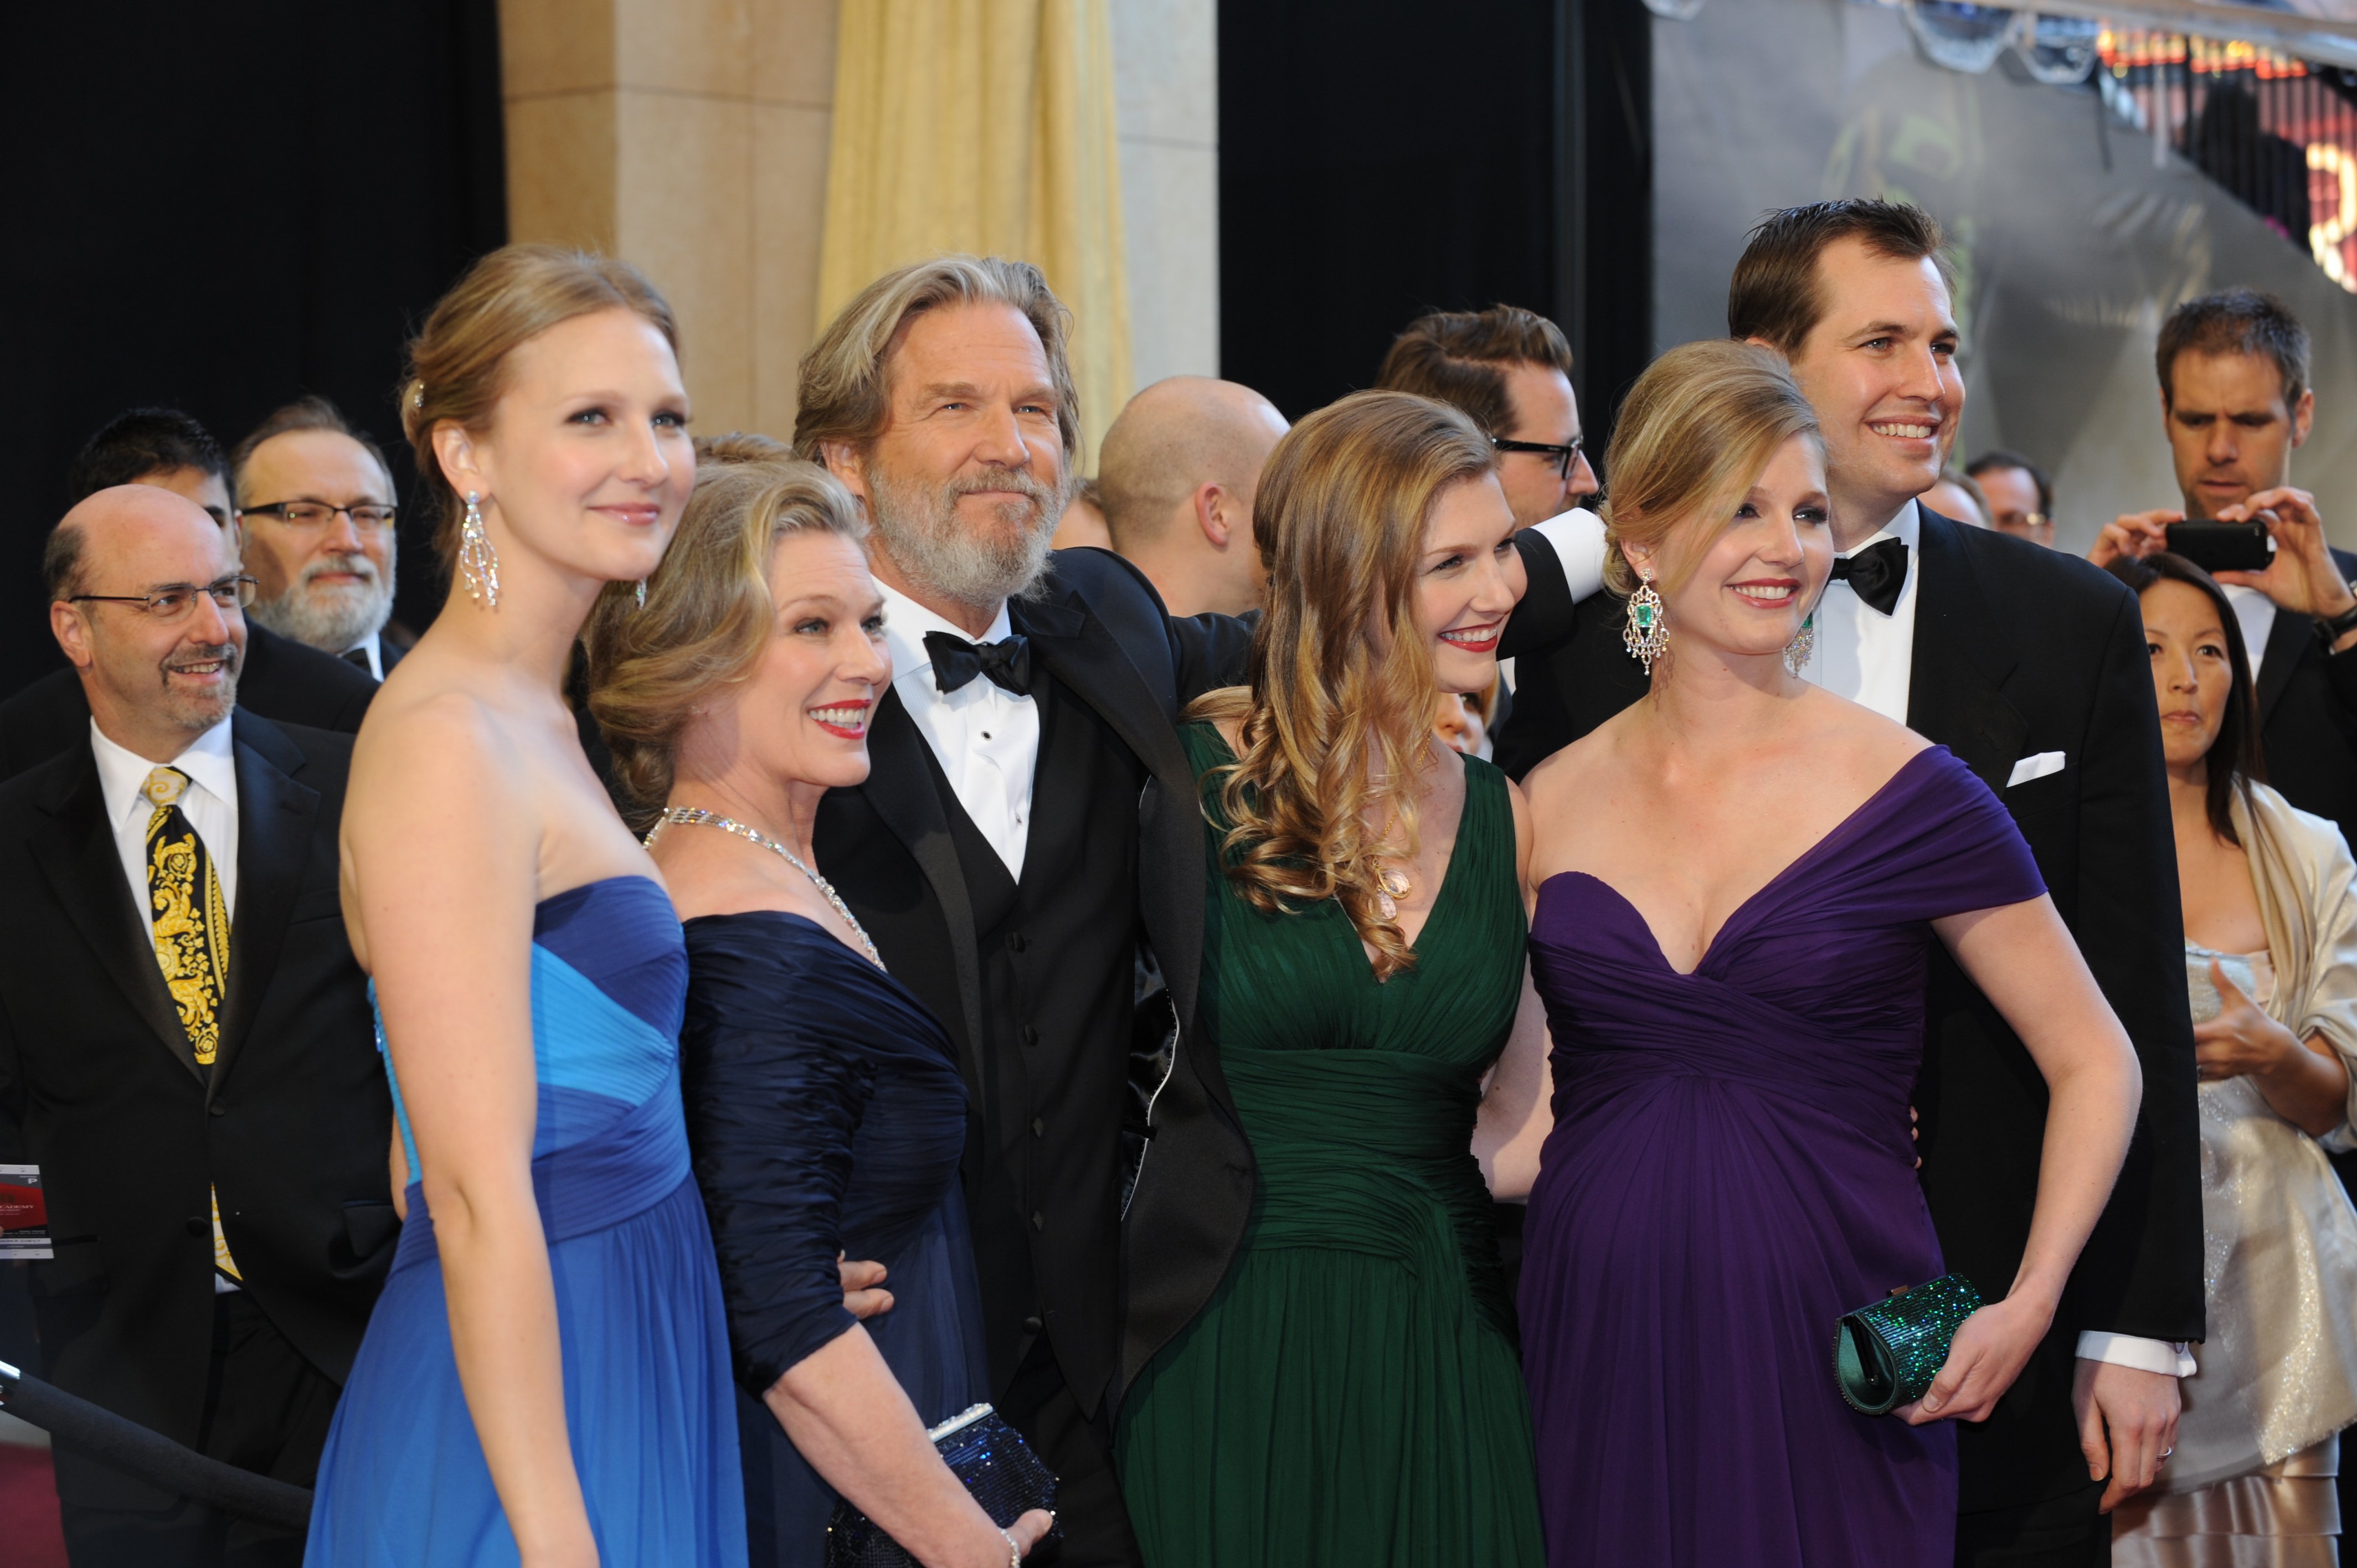 Portrait of actor Jeff Bridges and his wife, Susan as they pose together with their family at the Kodak Theater during the 83rd Academy Awards, Hollywood, California. | Source: Getty Images